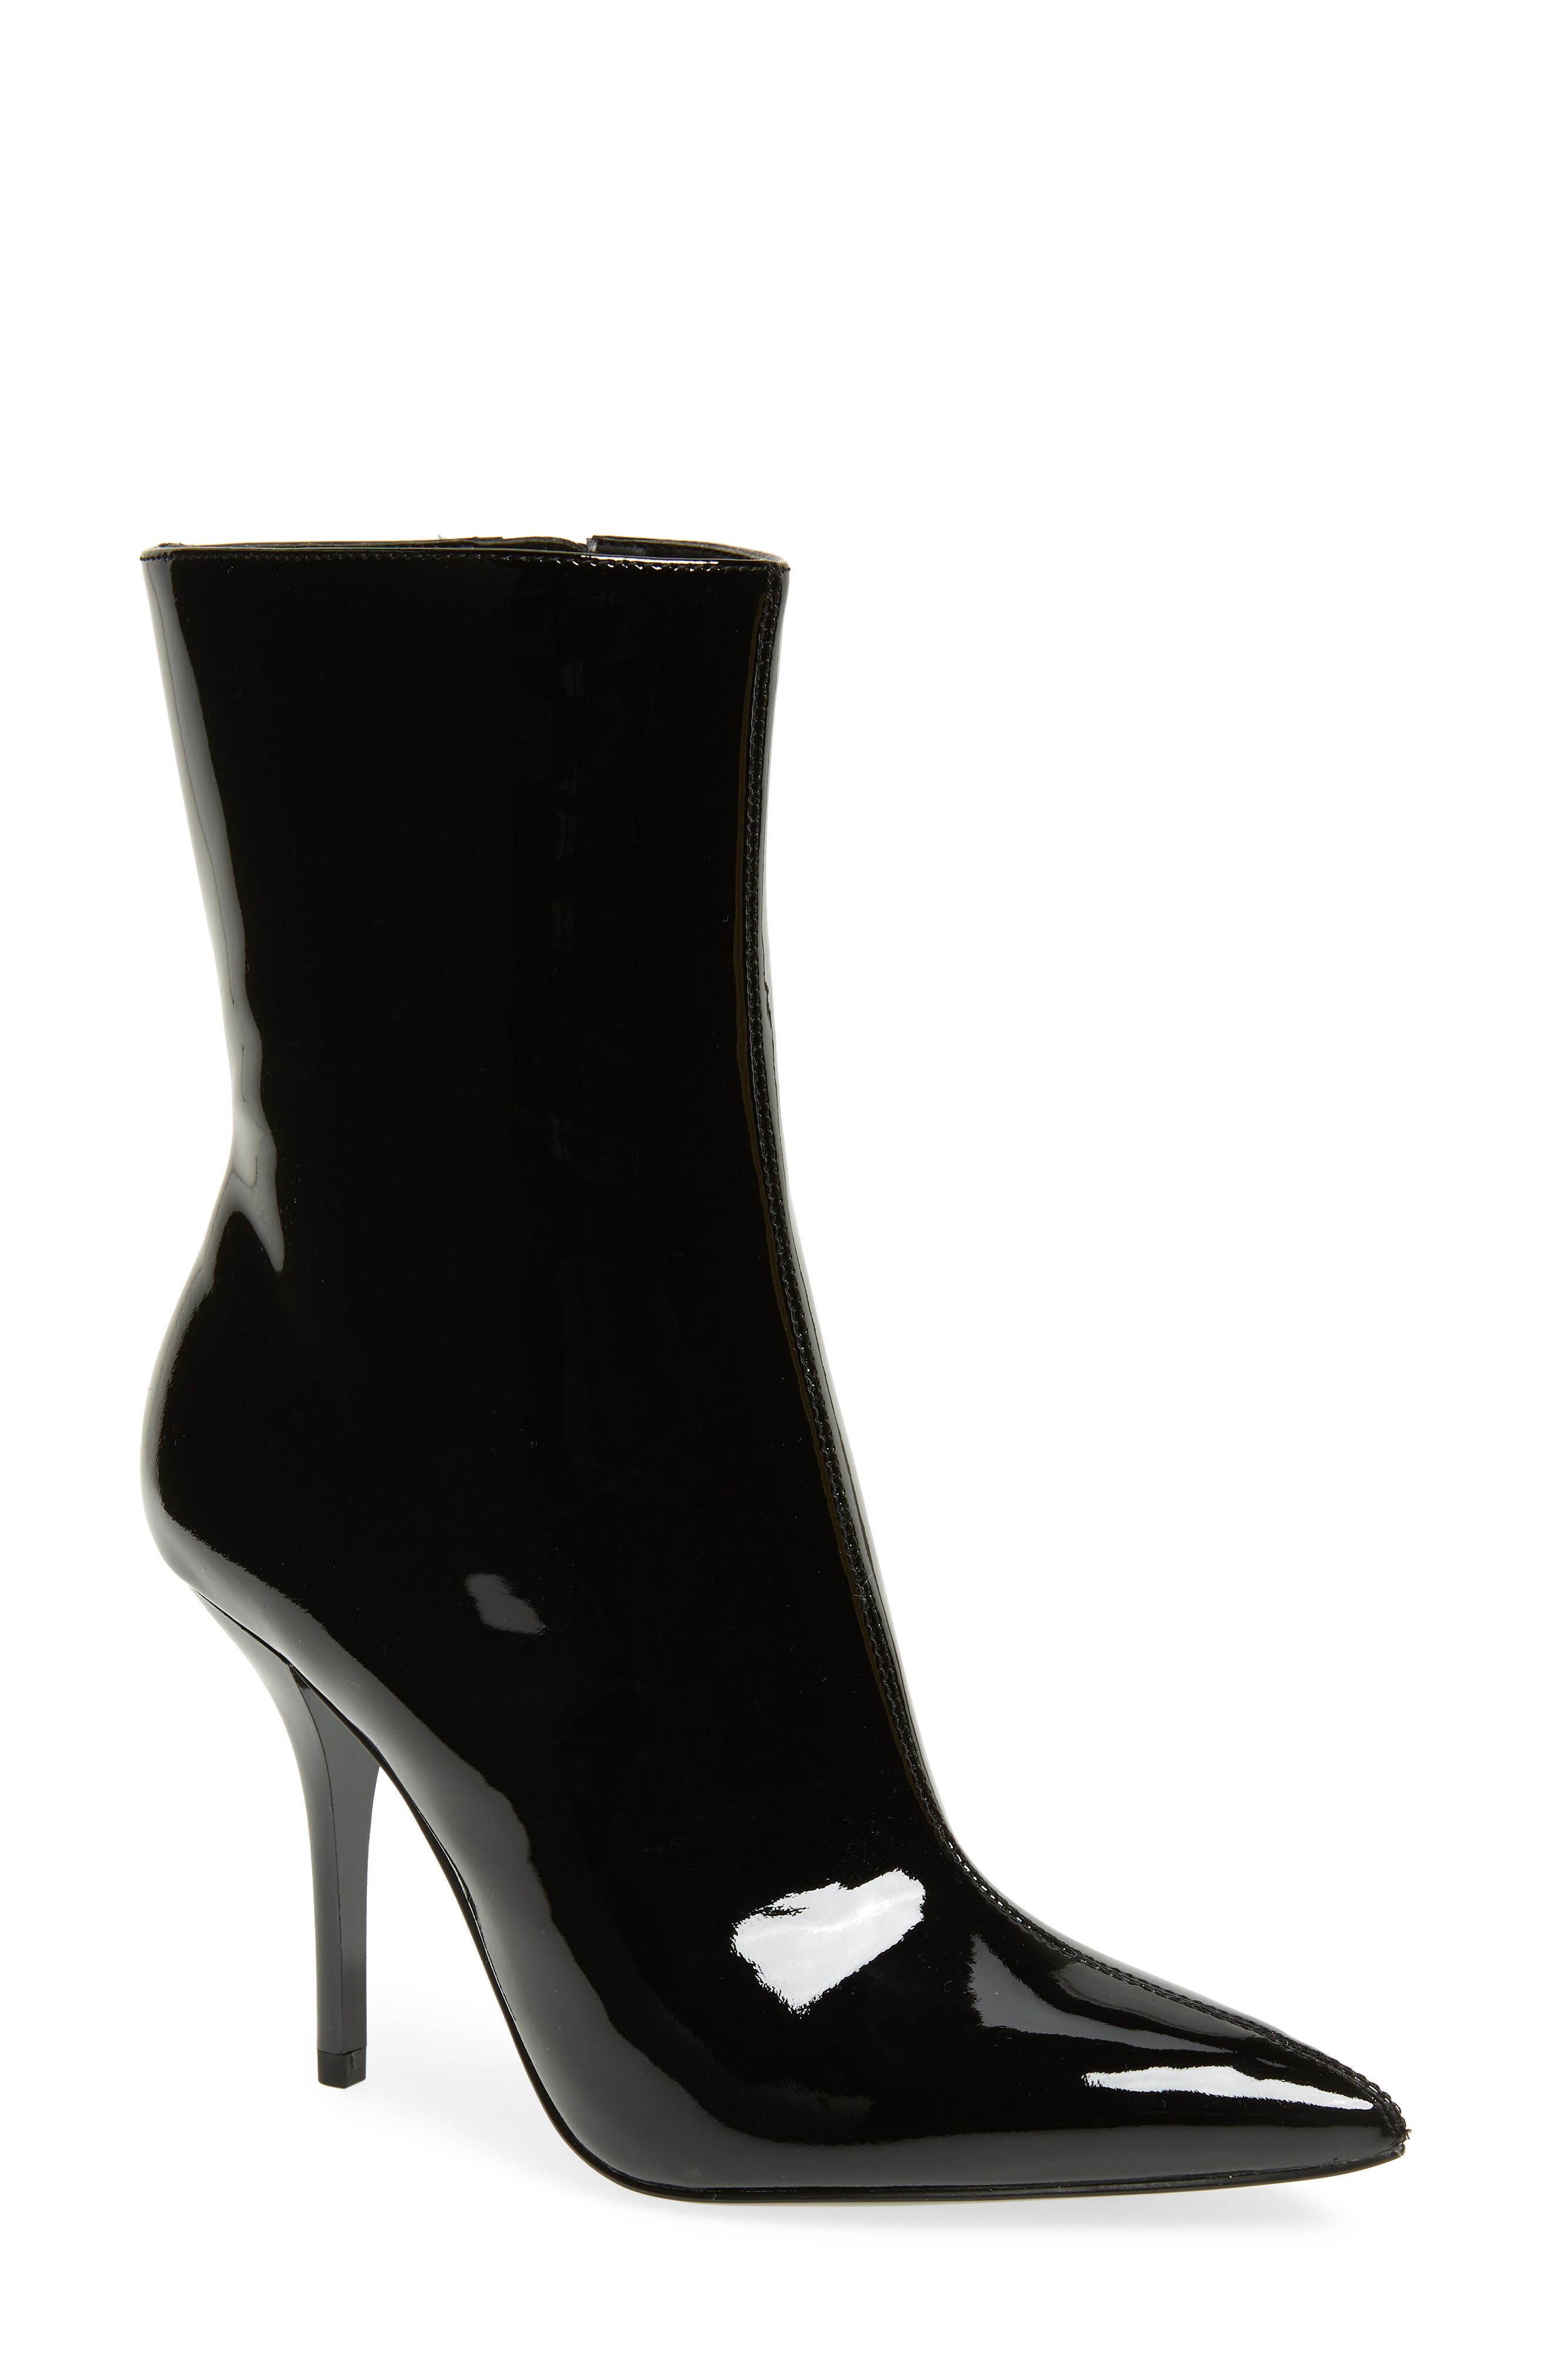 alexander mcqueen black and red chelsea leather boots